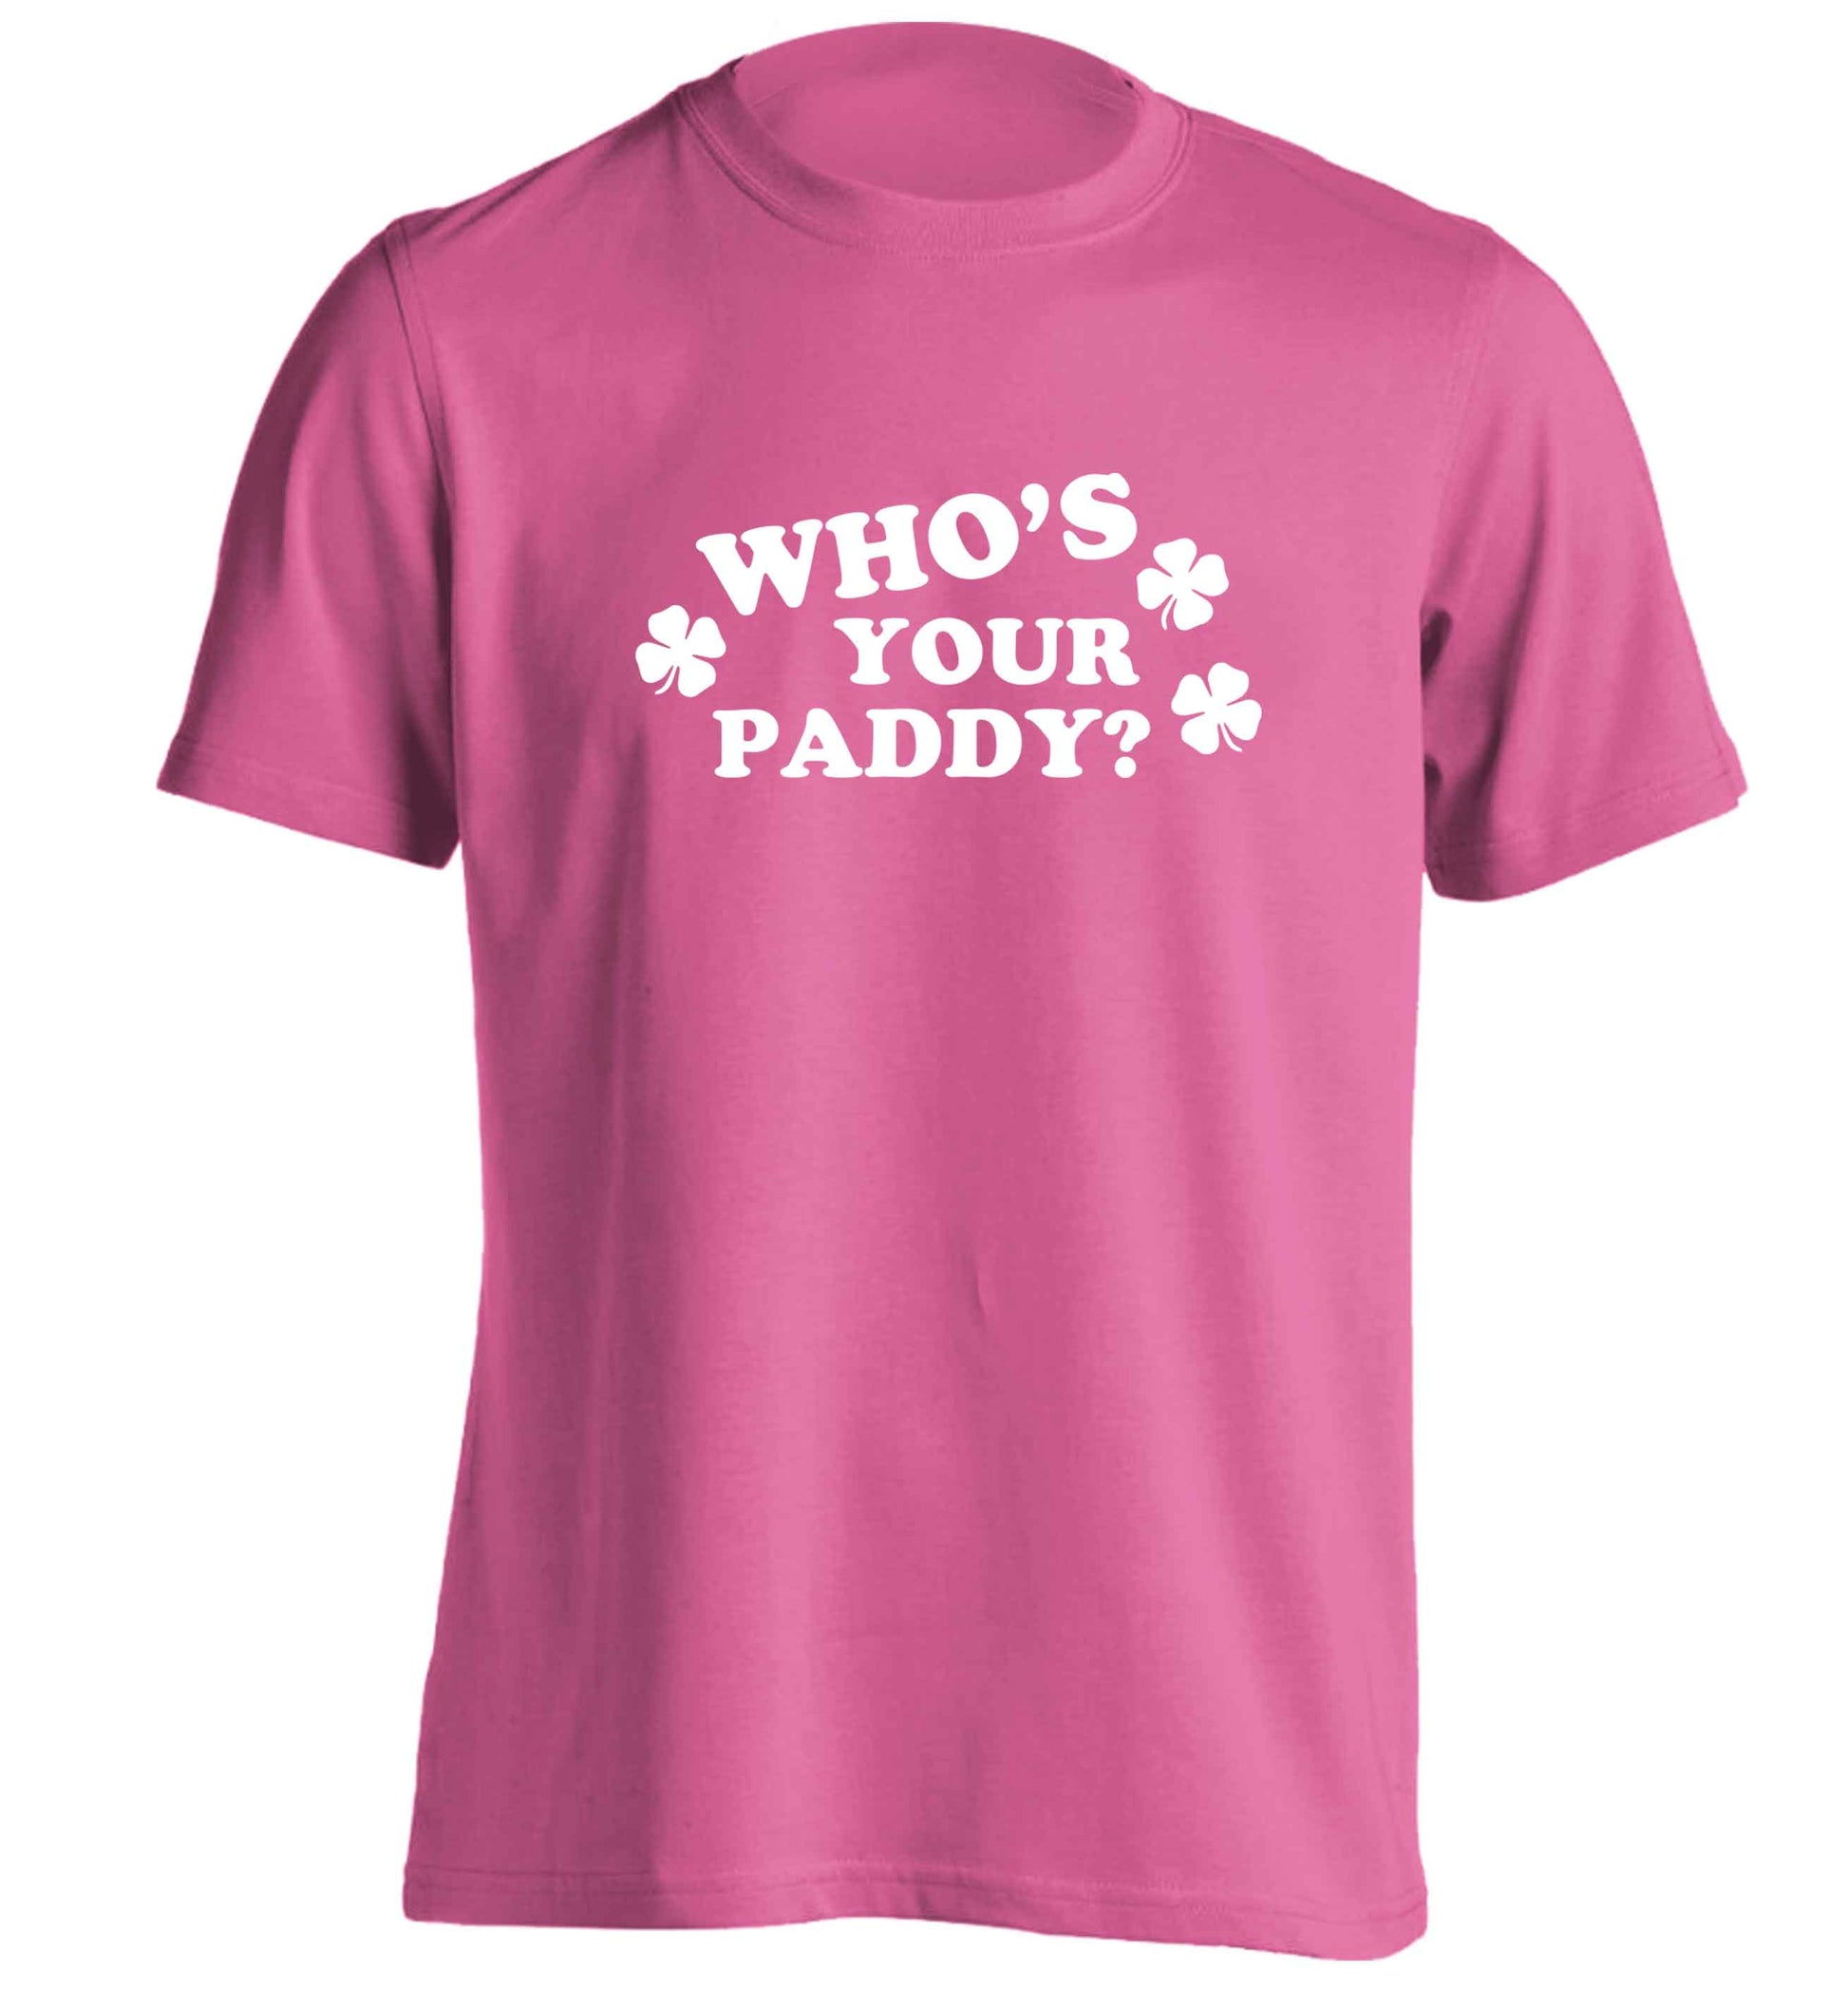 Who's your paddy? adults unisex pink Tshirt 2XL